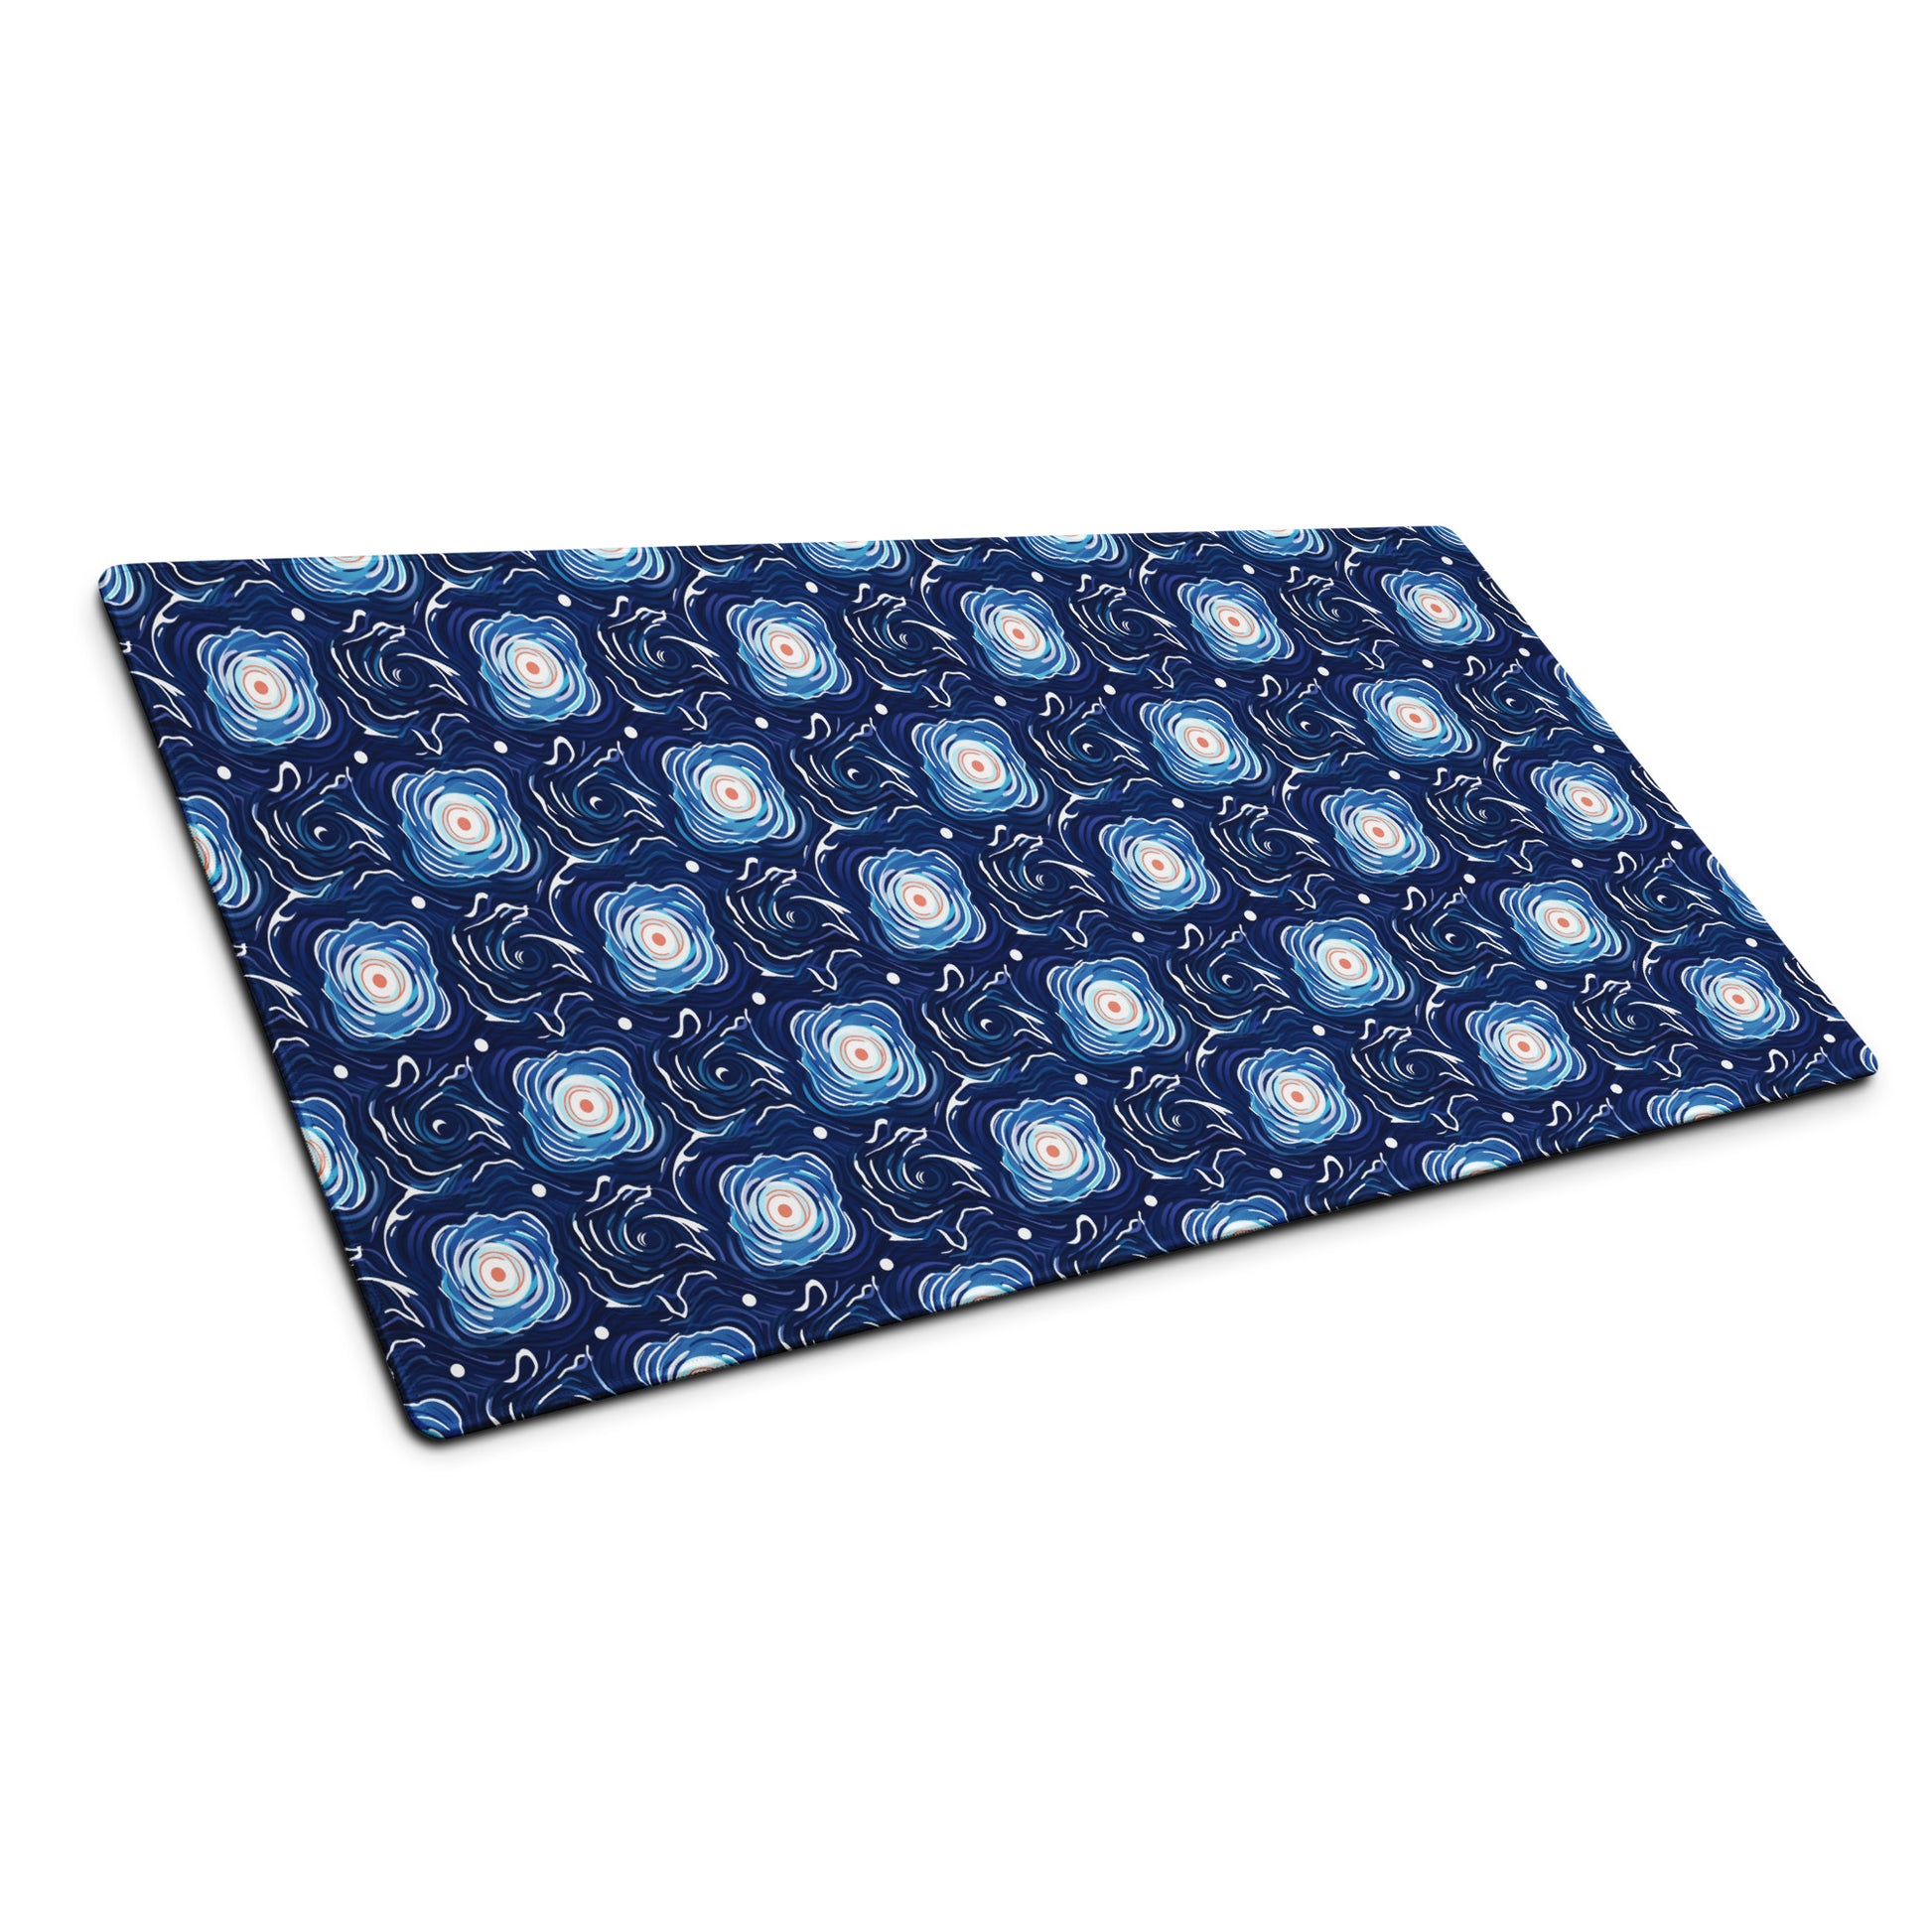 A 36" x 18" desk pad with a blue and white floral pattern sitting at an angle.